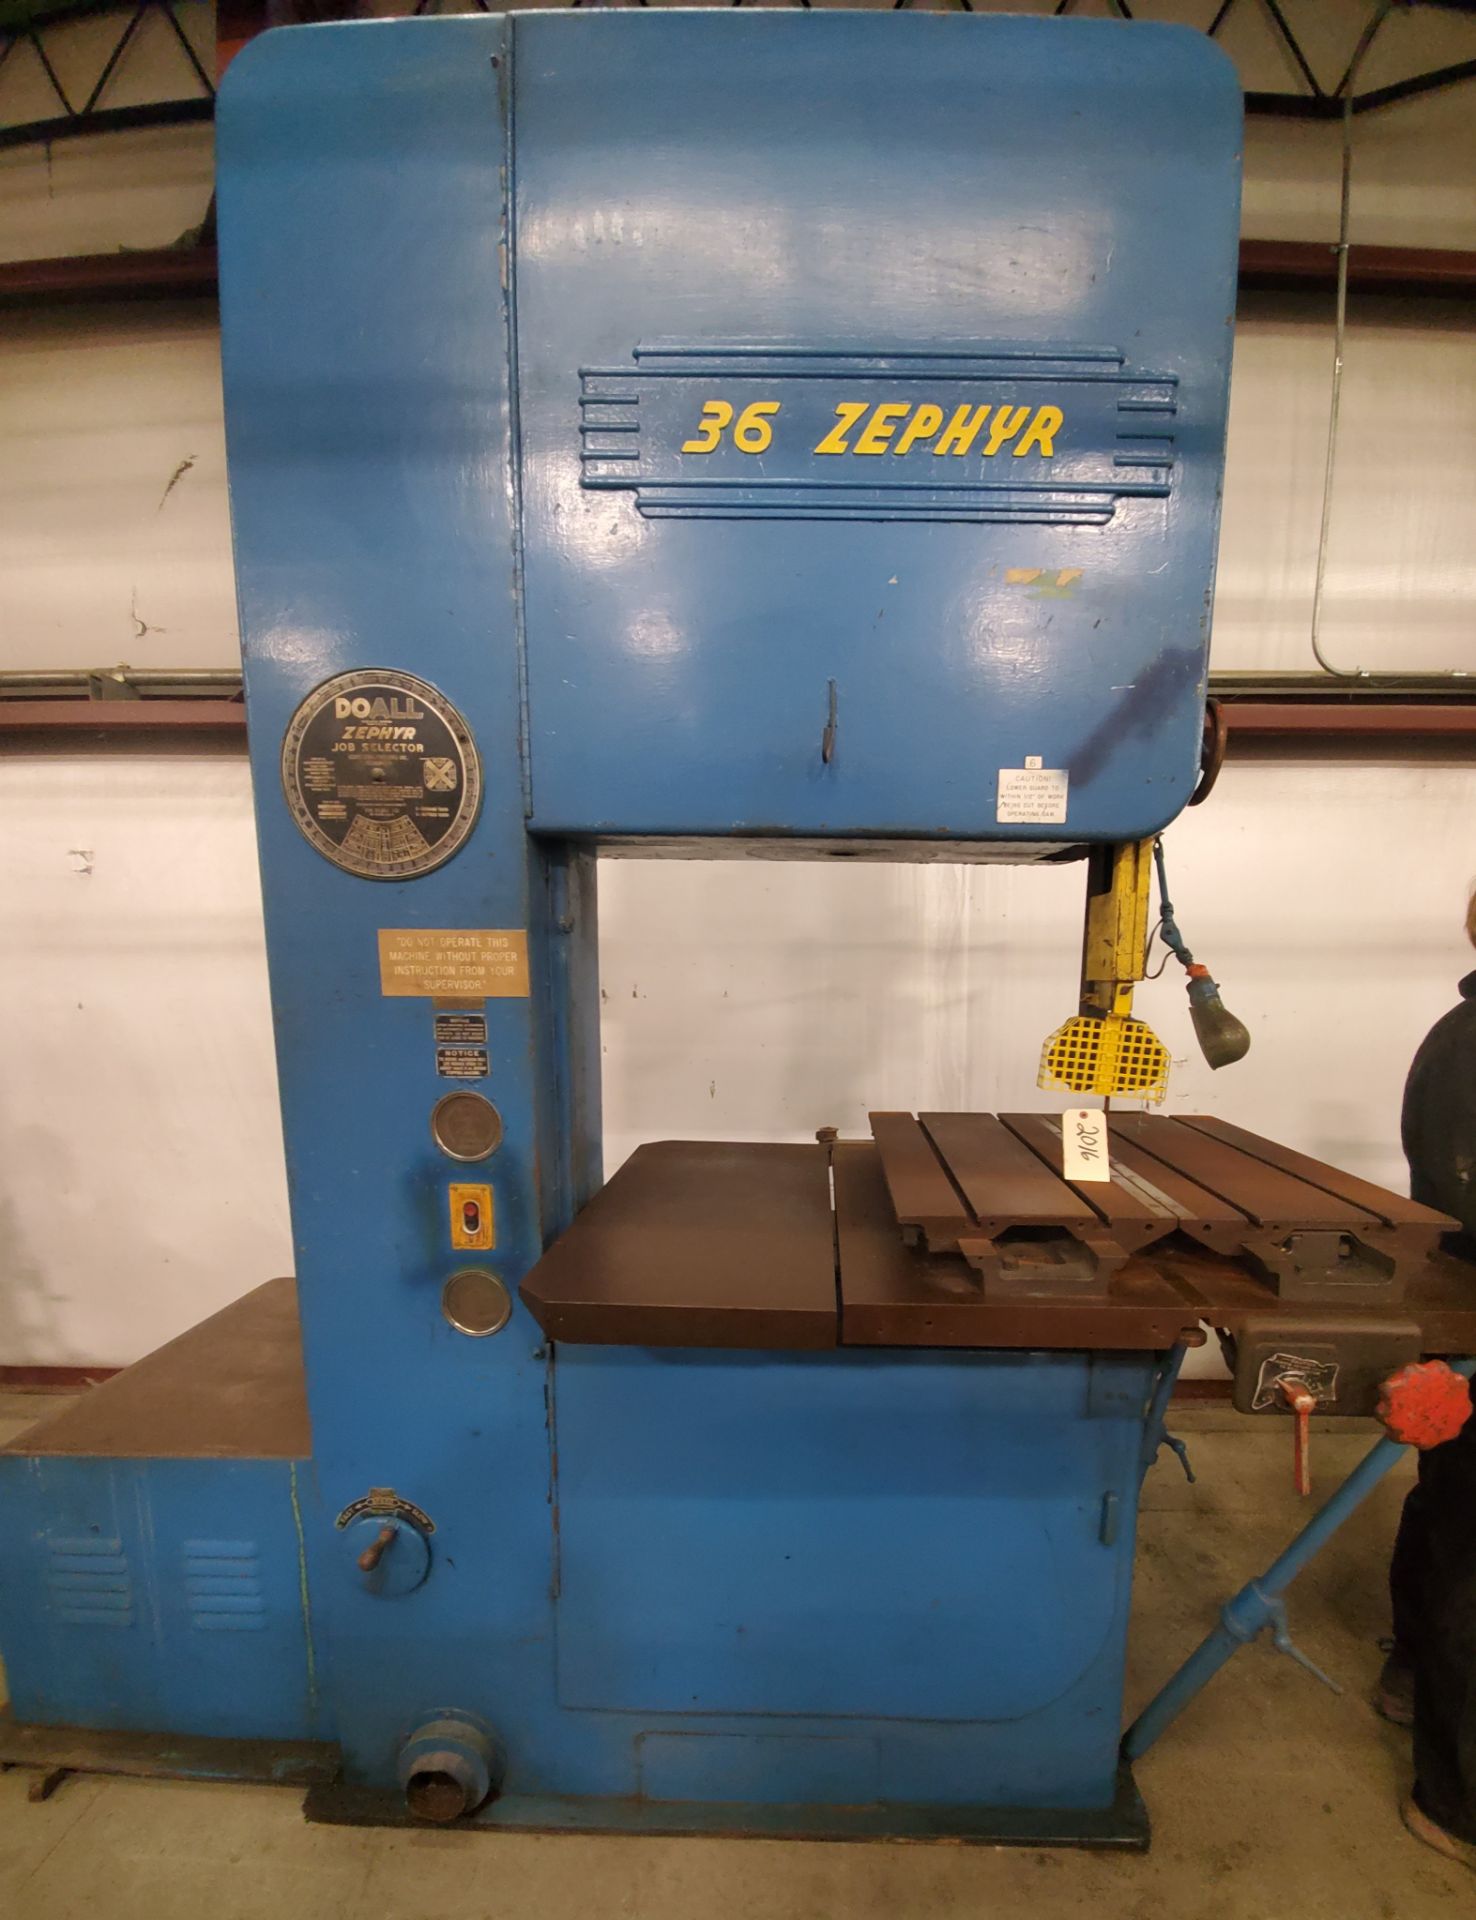 DoAll 36" Zephyr Band Saw